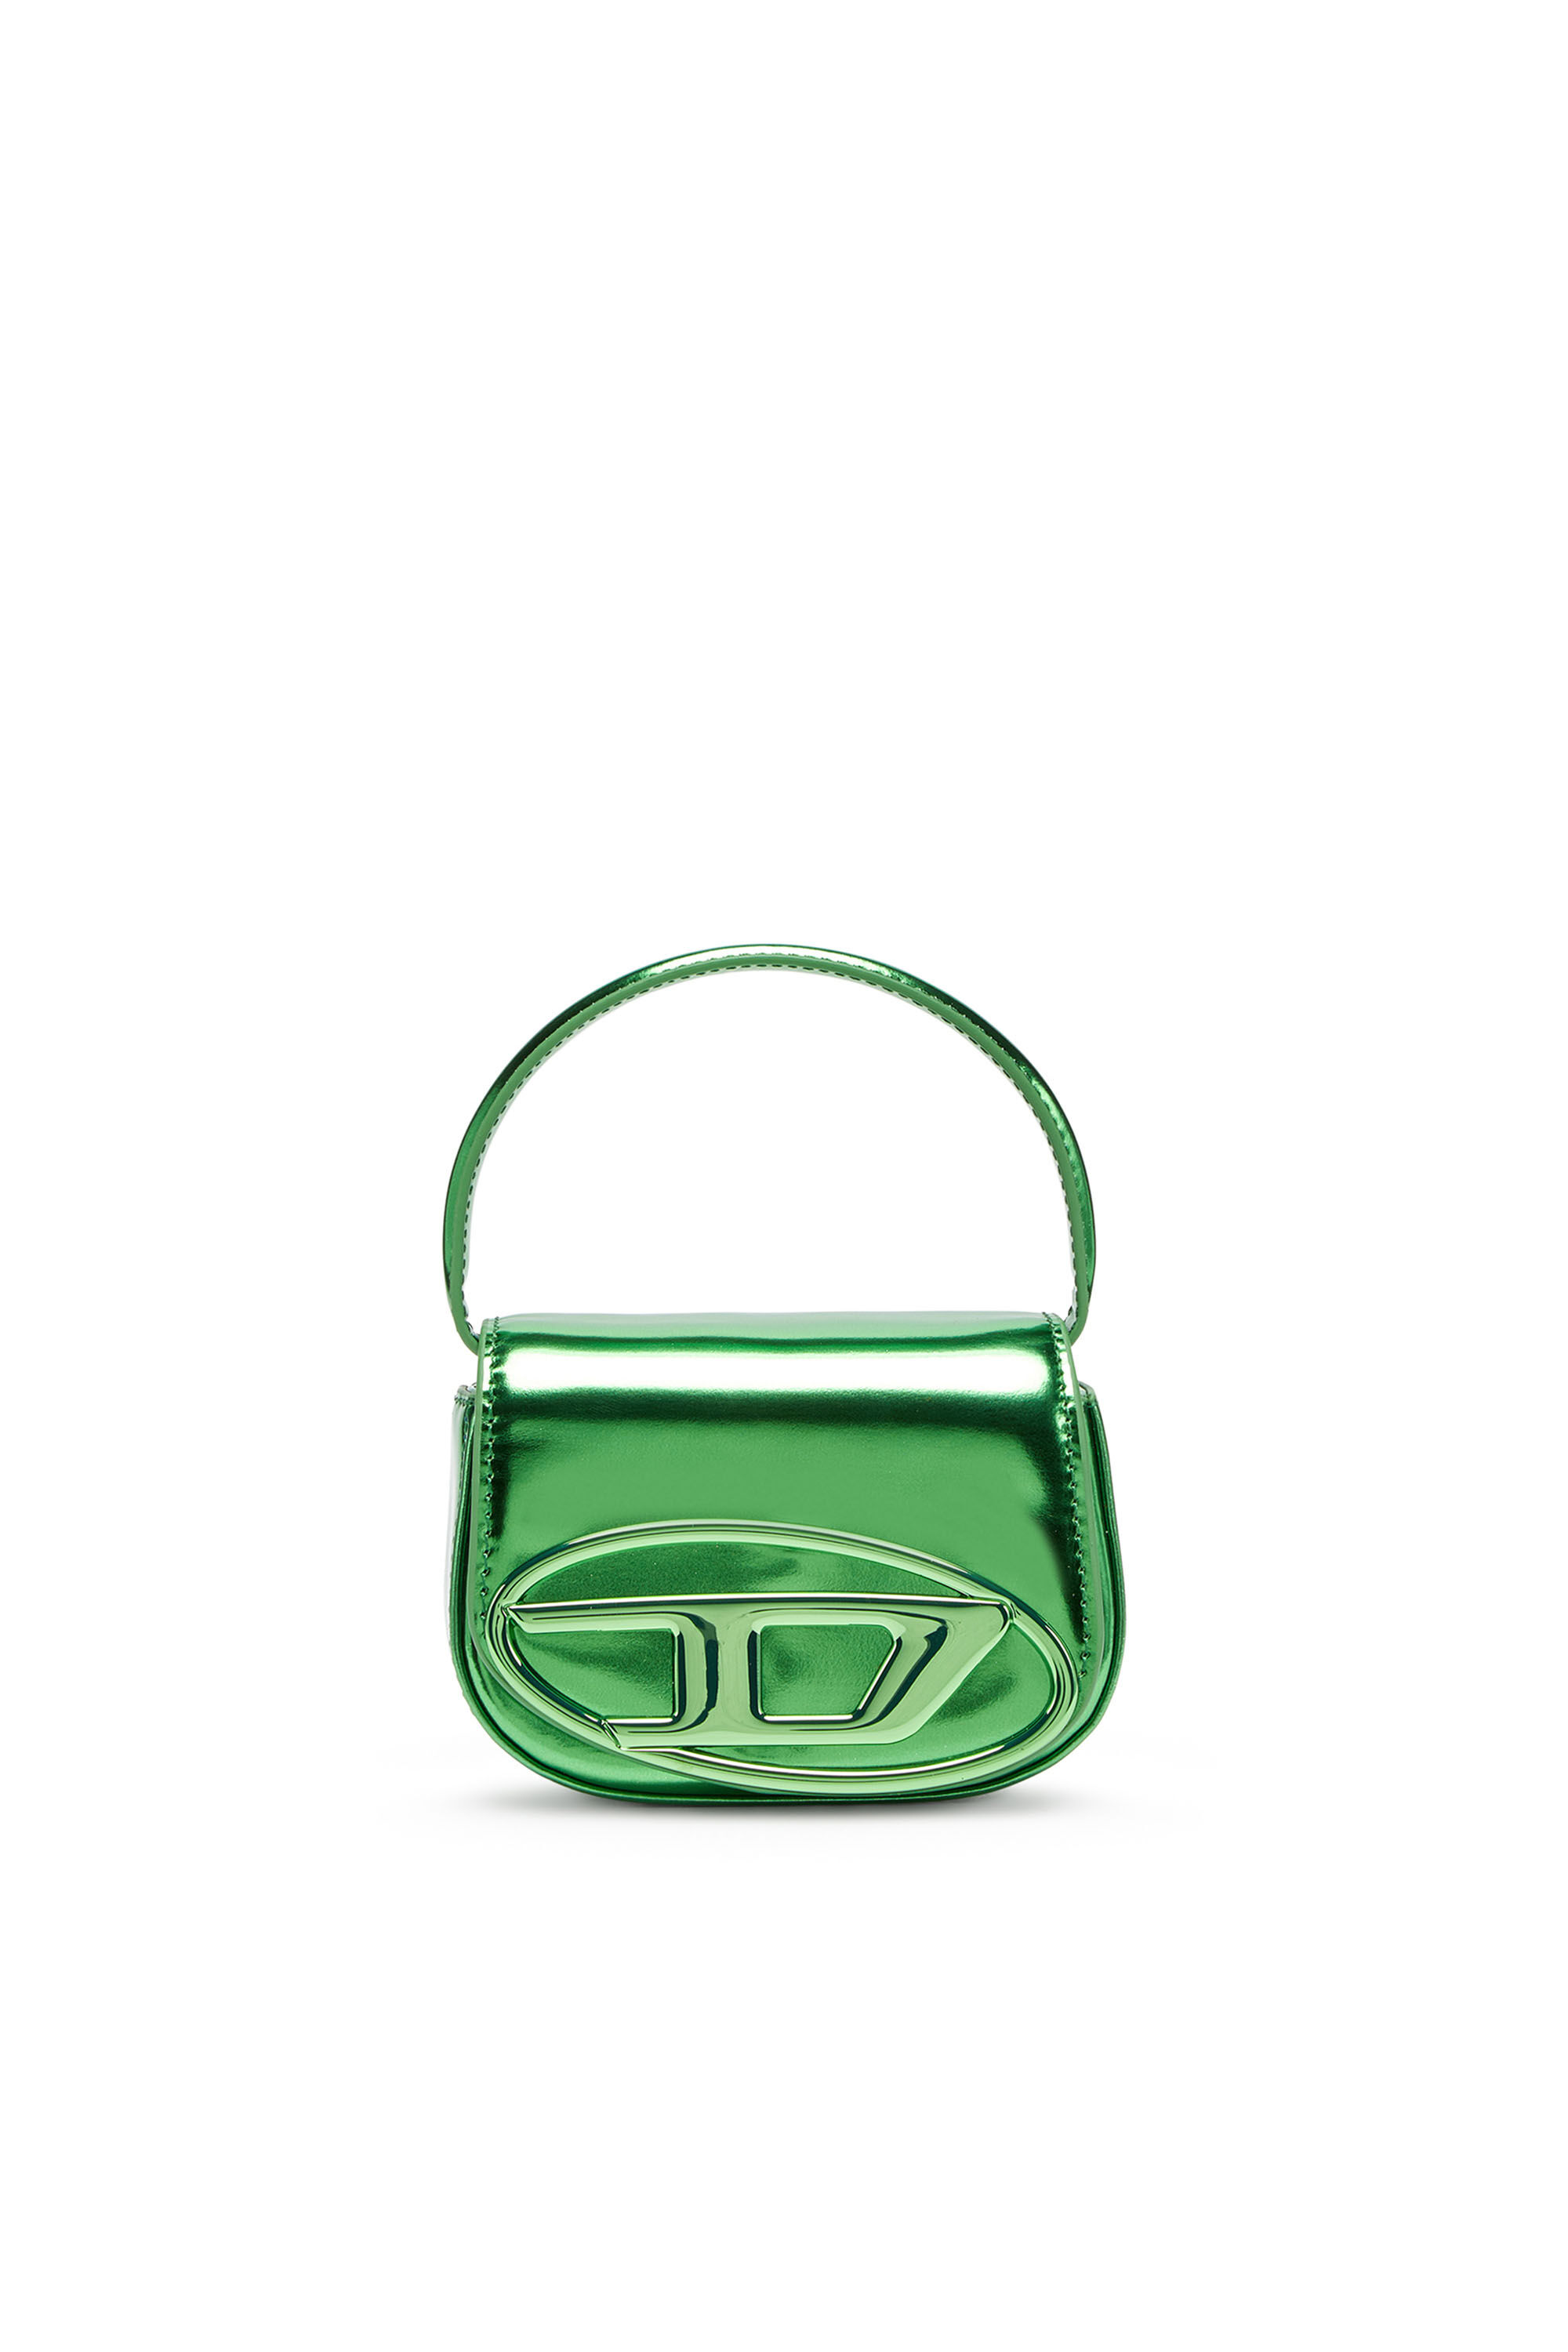 Diesel - 1DR-XS-S, Woman 1DR-XS-S-Iconic mini bag in mirrored leather in Green - Image 1